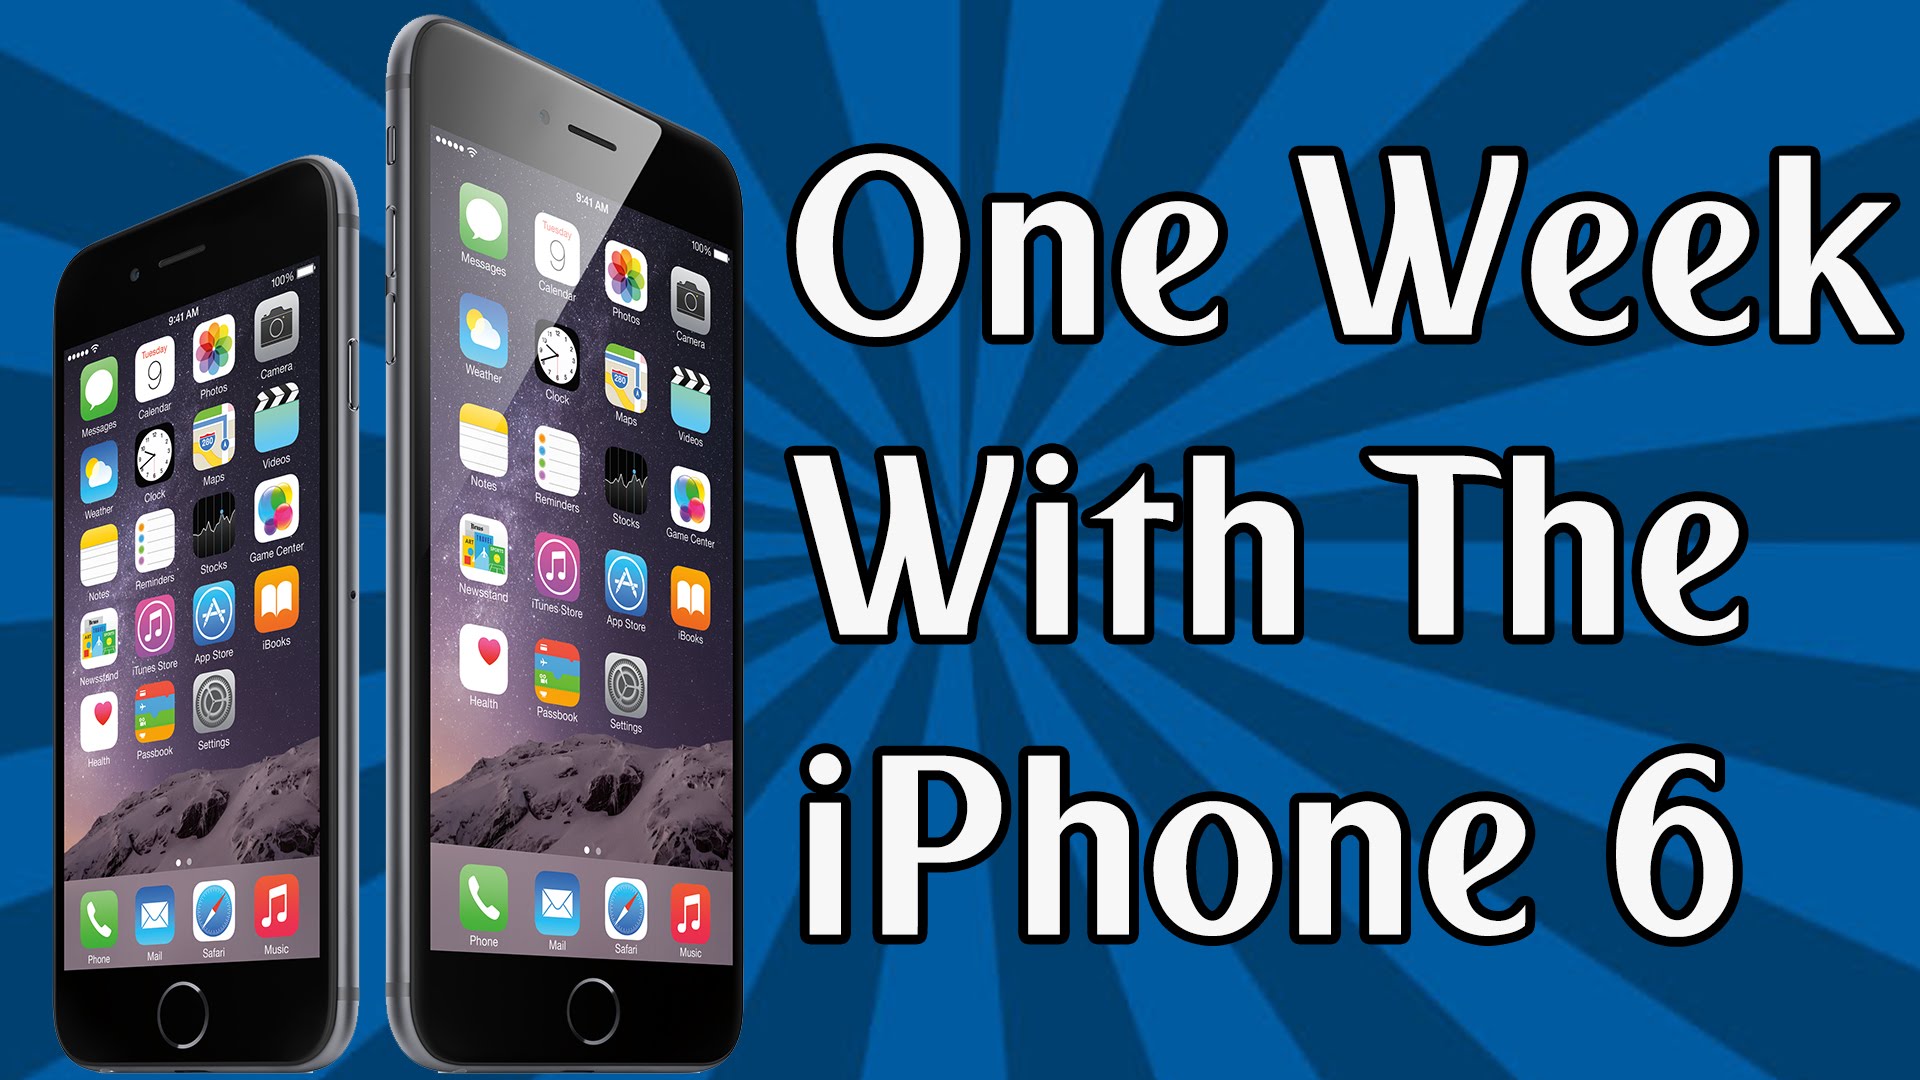 One Week With The iPhone 6